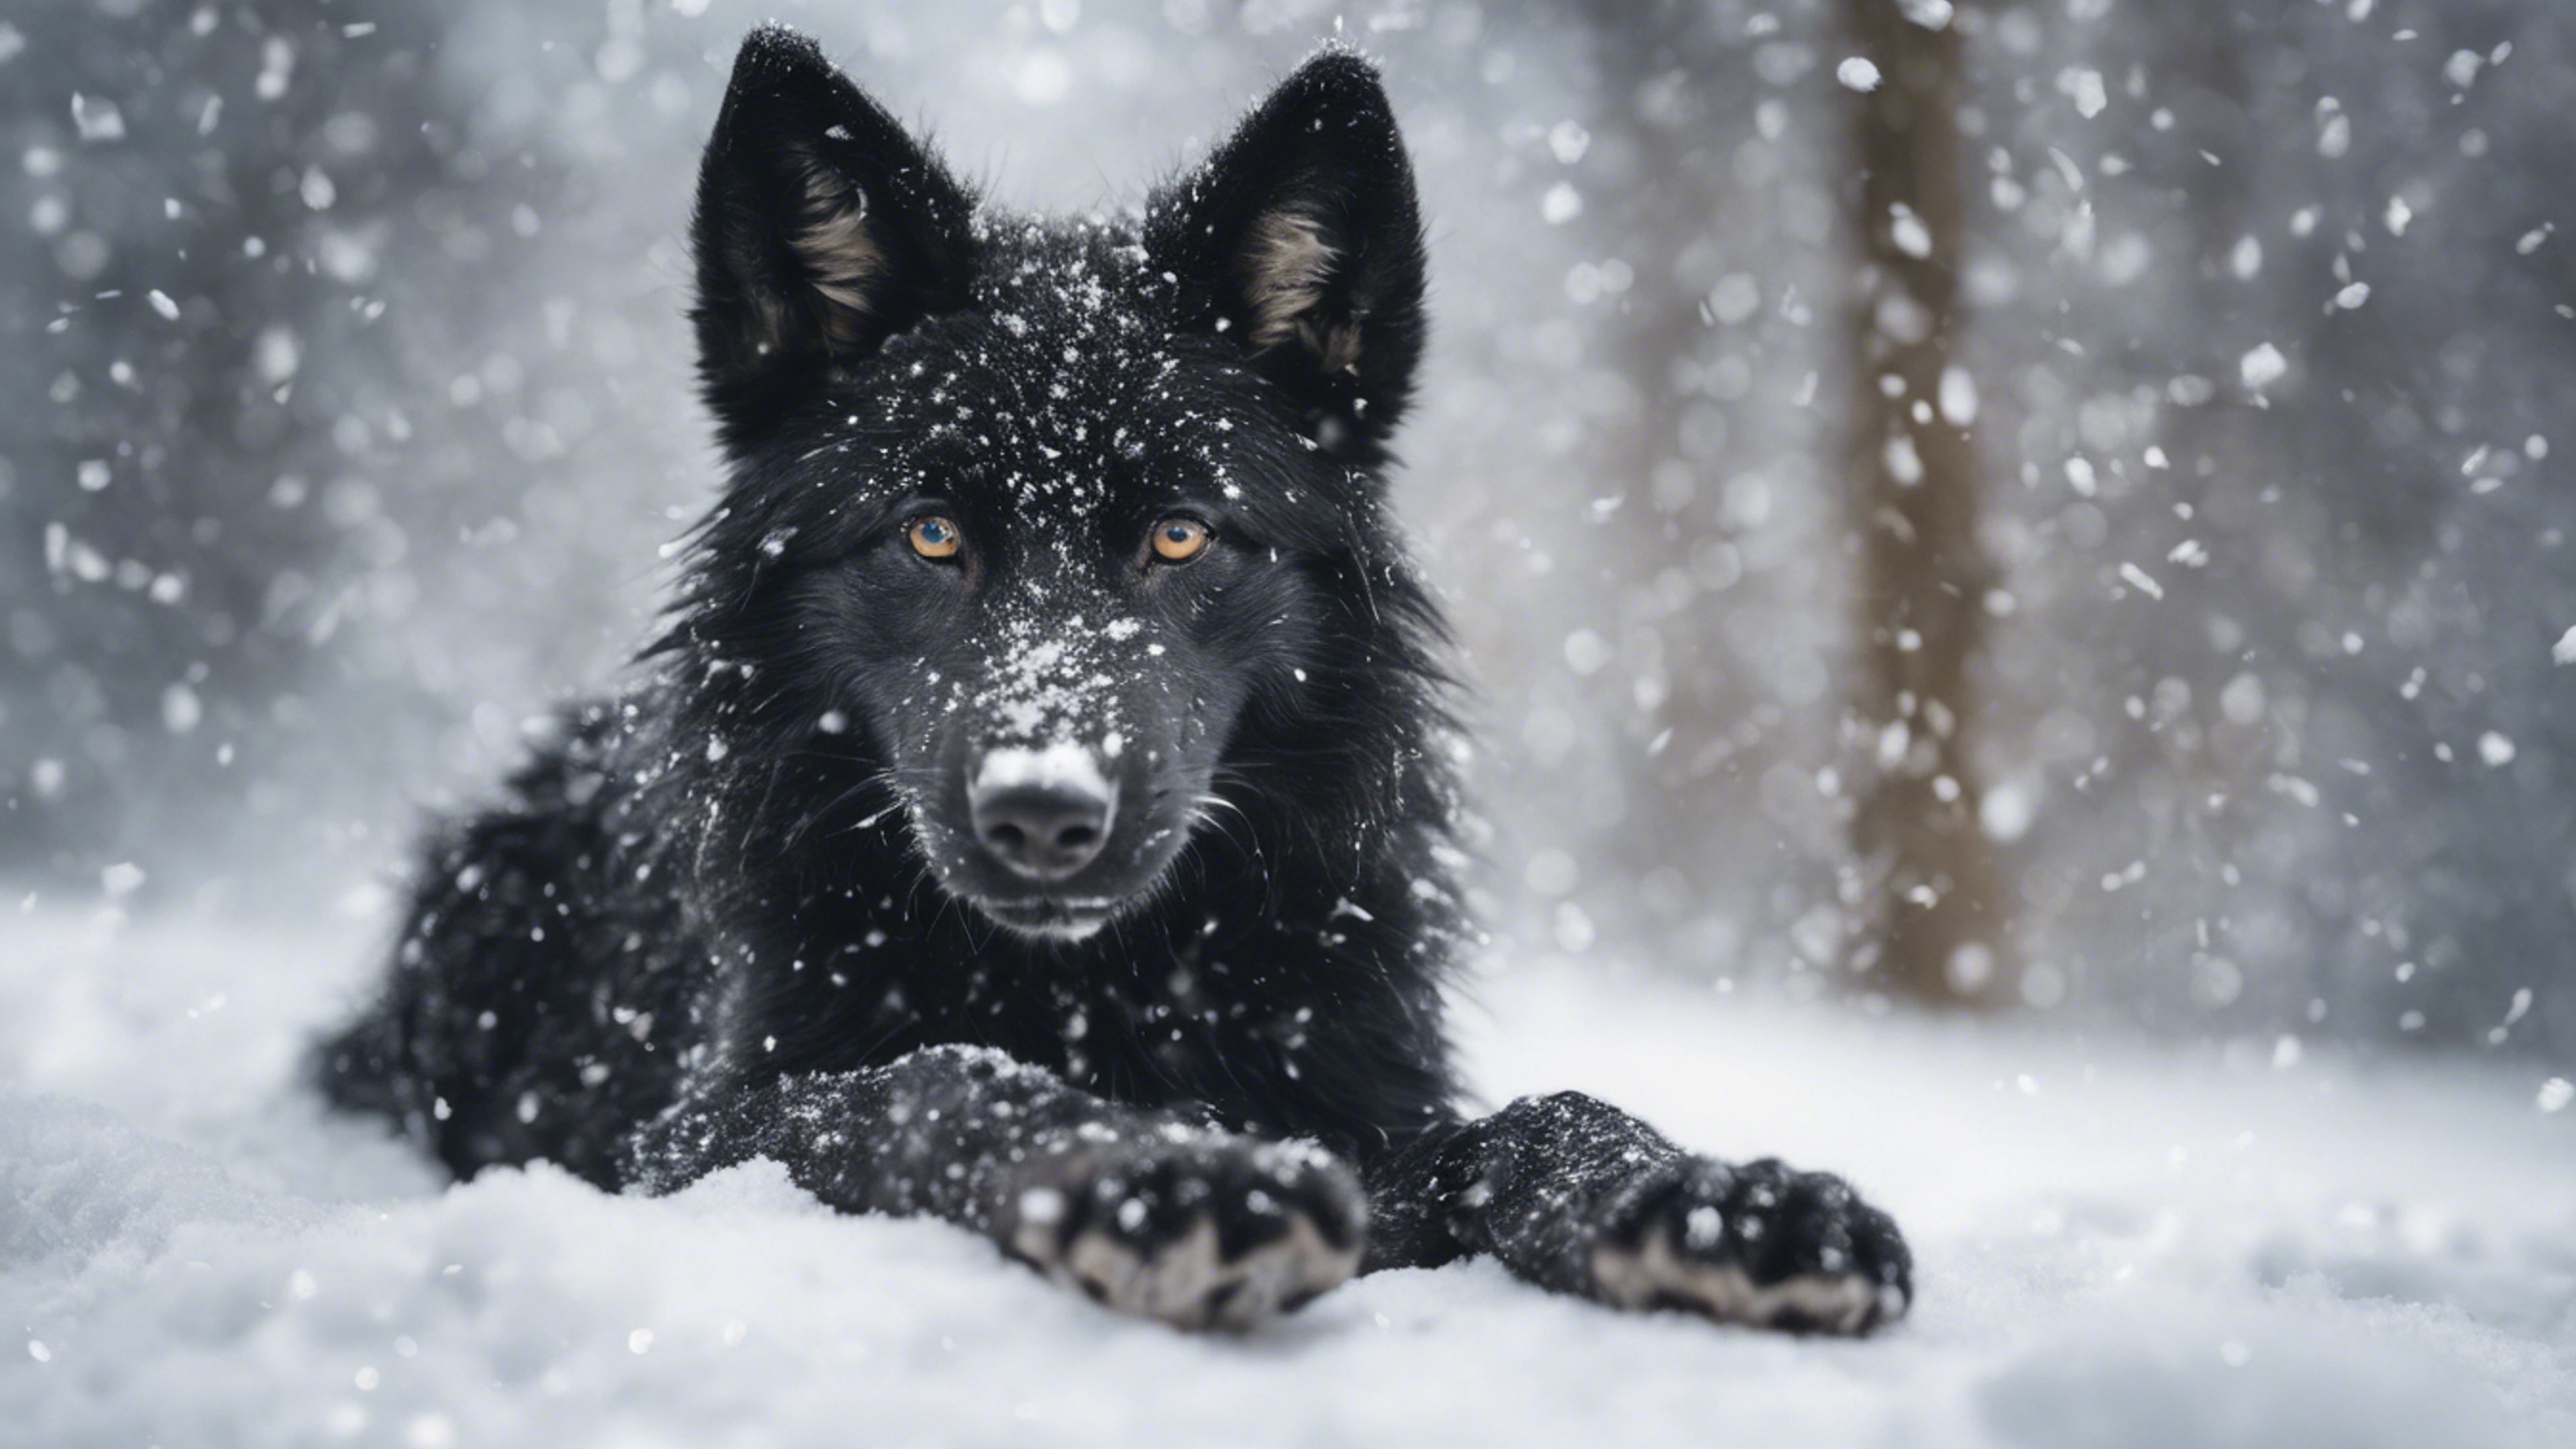 A playful black wolf puppy making the first snow angel of its life. Hình nền[6a2907d16c81420c9dae]